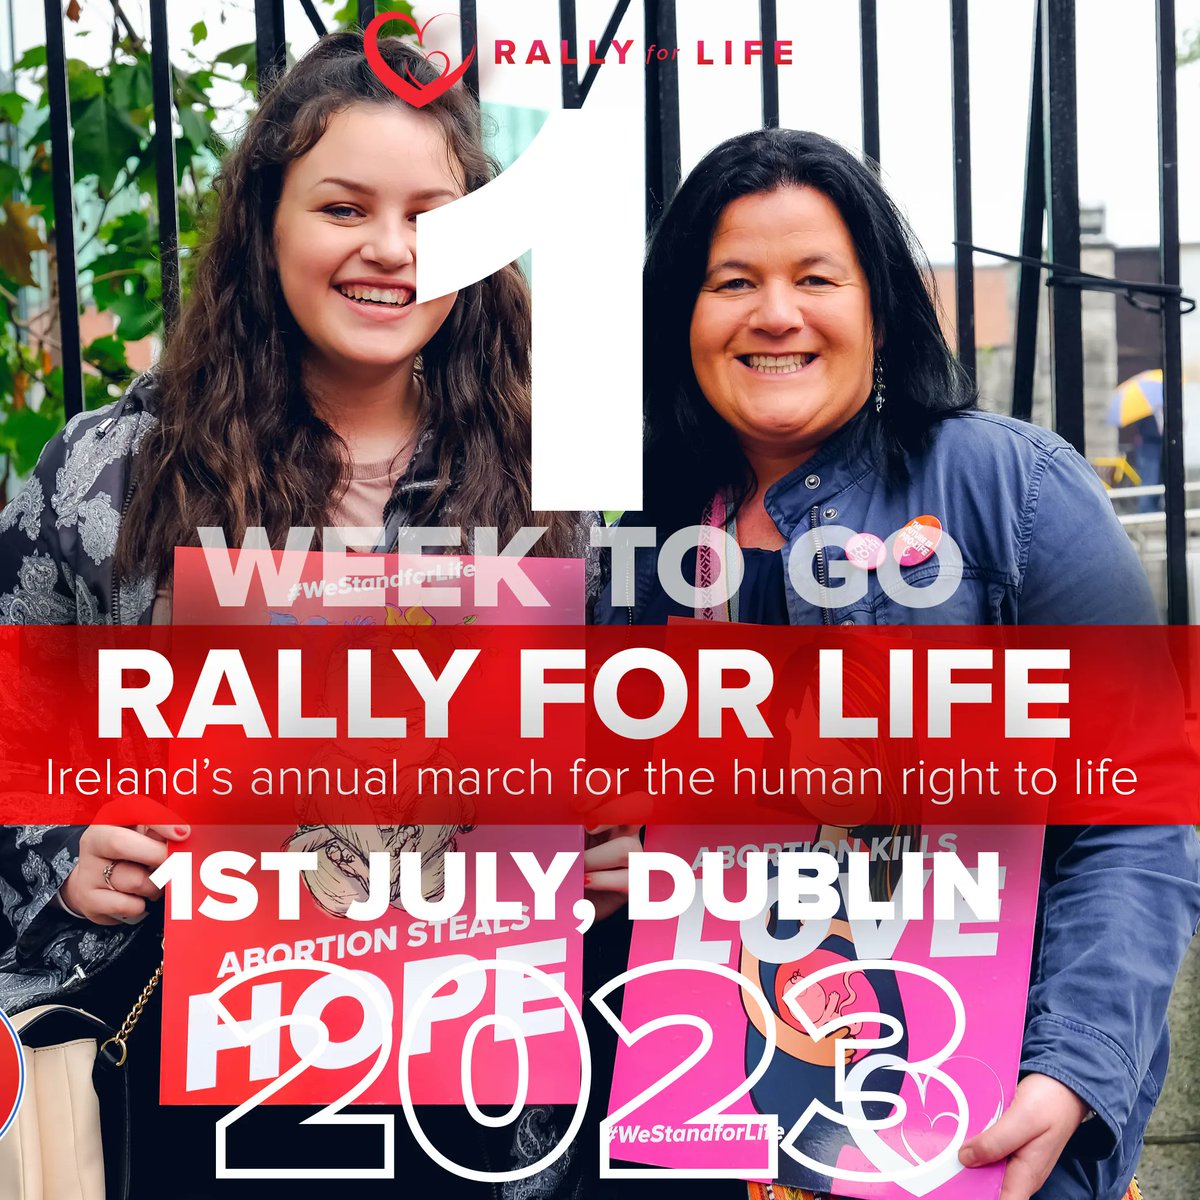 It’s almost here!! We are now just 1 WEEK away from the Rally for Life!! We look forward to seeing you NEXT WEEK on Saturday 1st July in Parnell Sq. at 1pm. 

More about the Rally for Life 2023 can be found here: buff.ly/3kxksfa

#StopAbortingOurFuture #RallyforLife